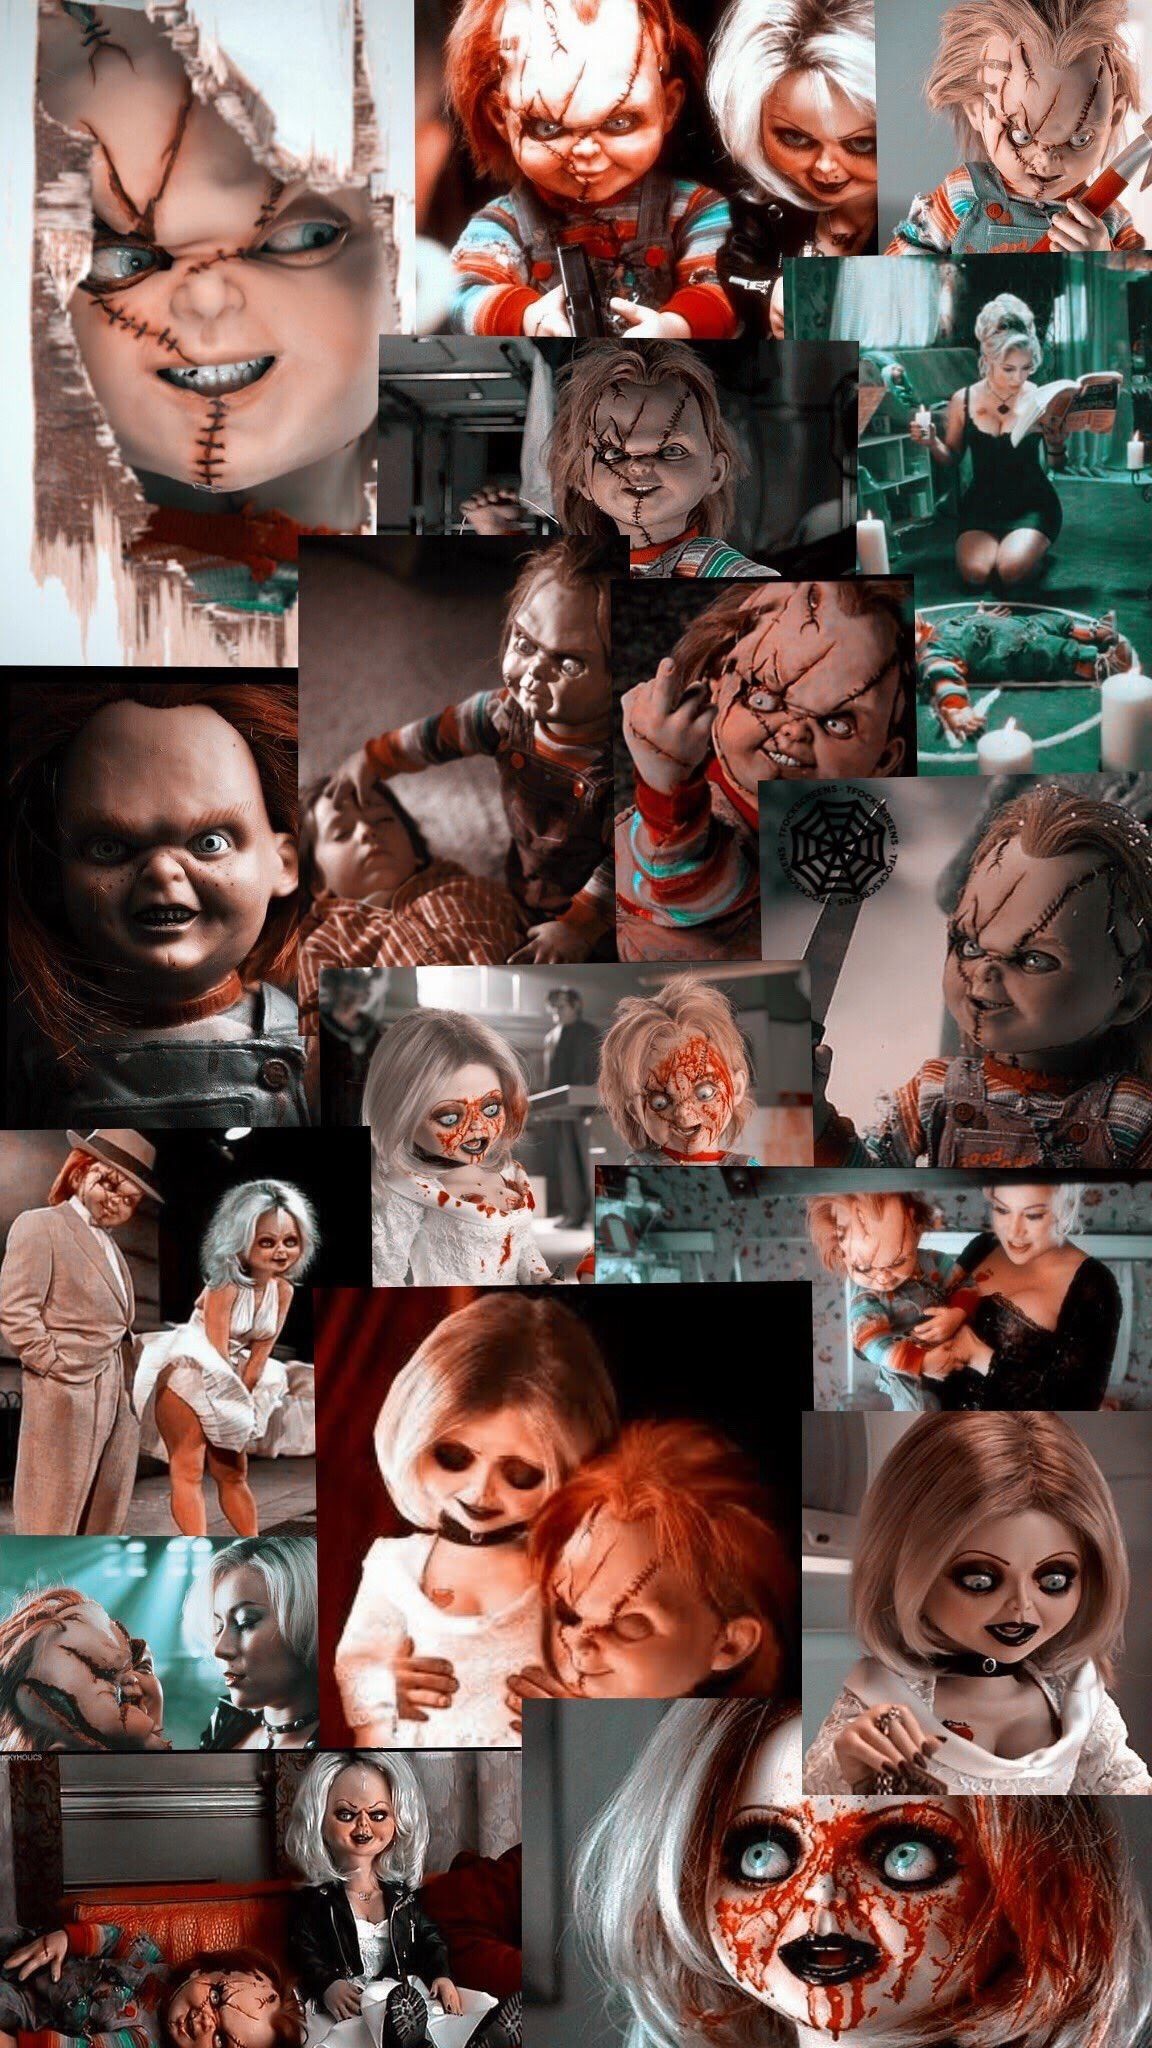 bride of chucky free online full movie